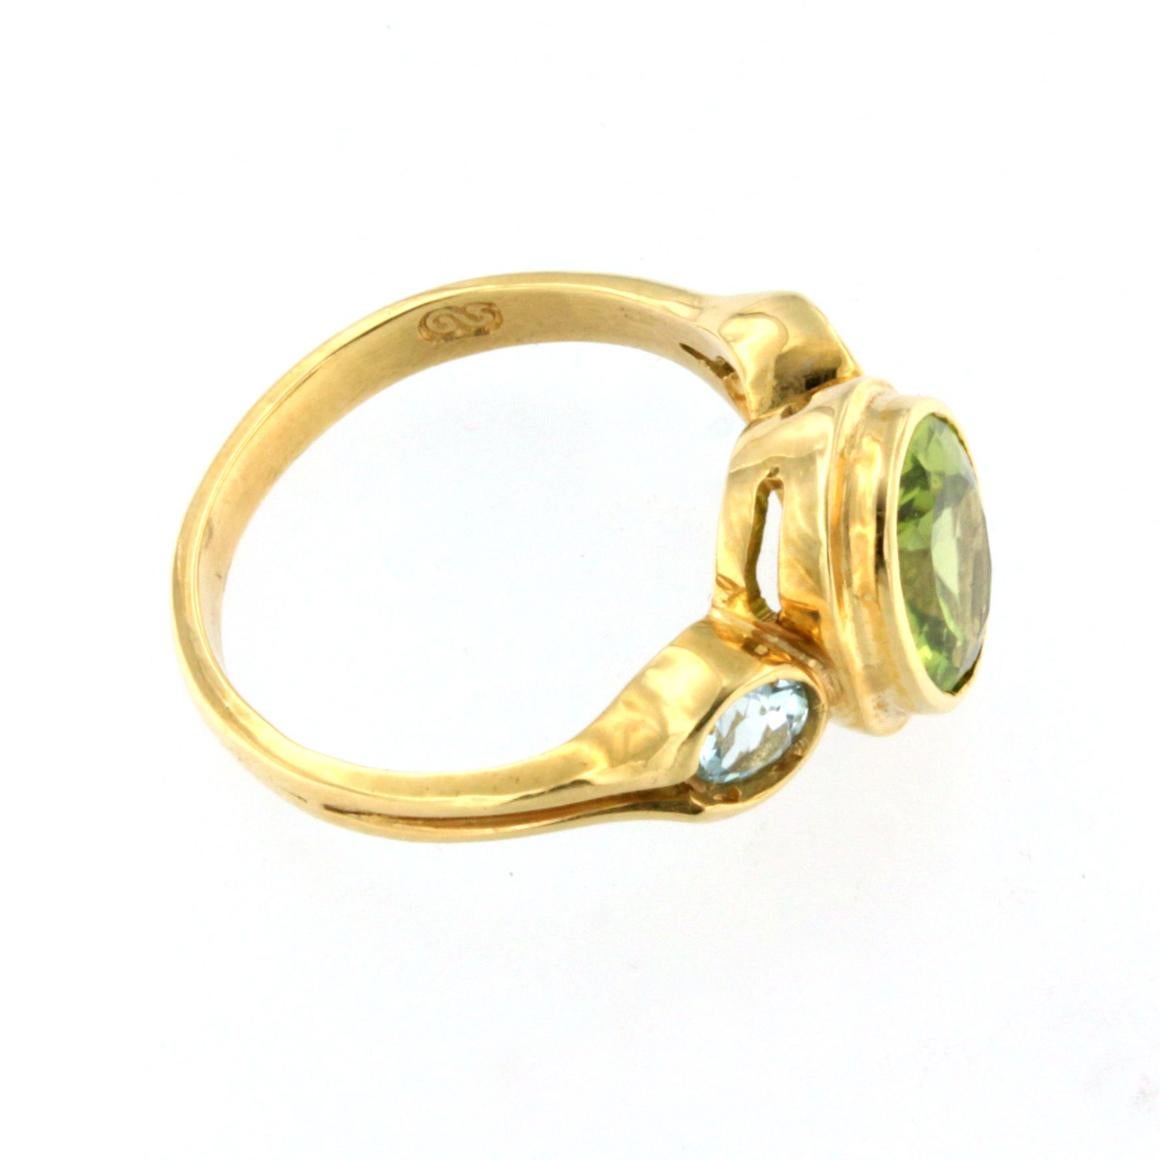 Oval Cut 18k Yellow Gold with Peridot and Blue Topaz Ring